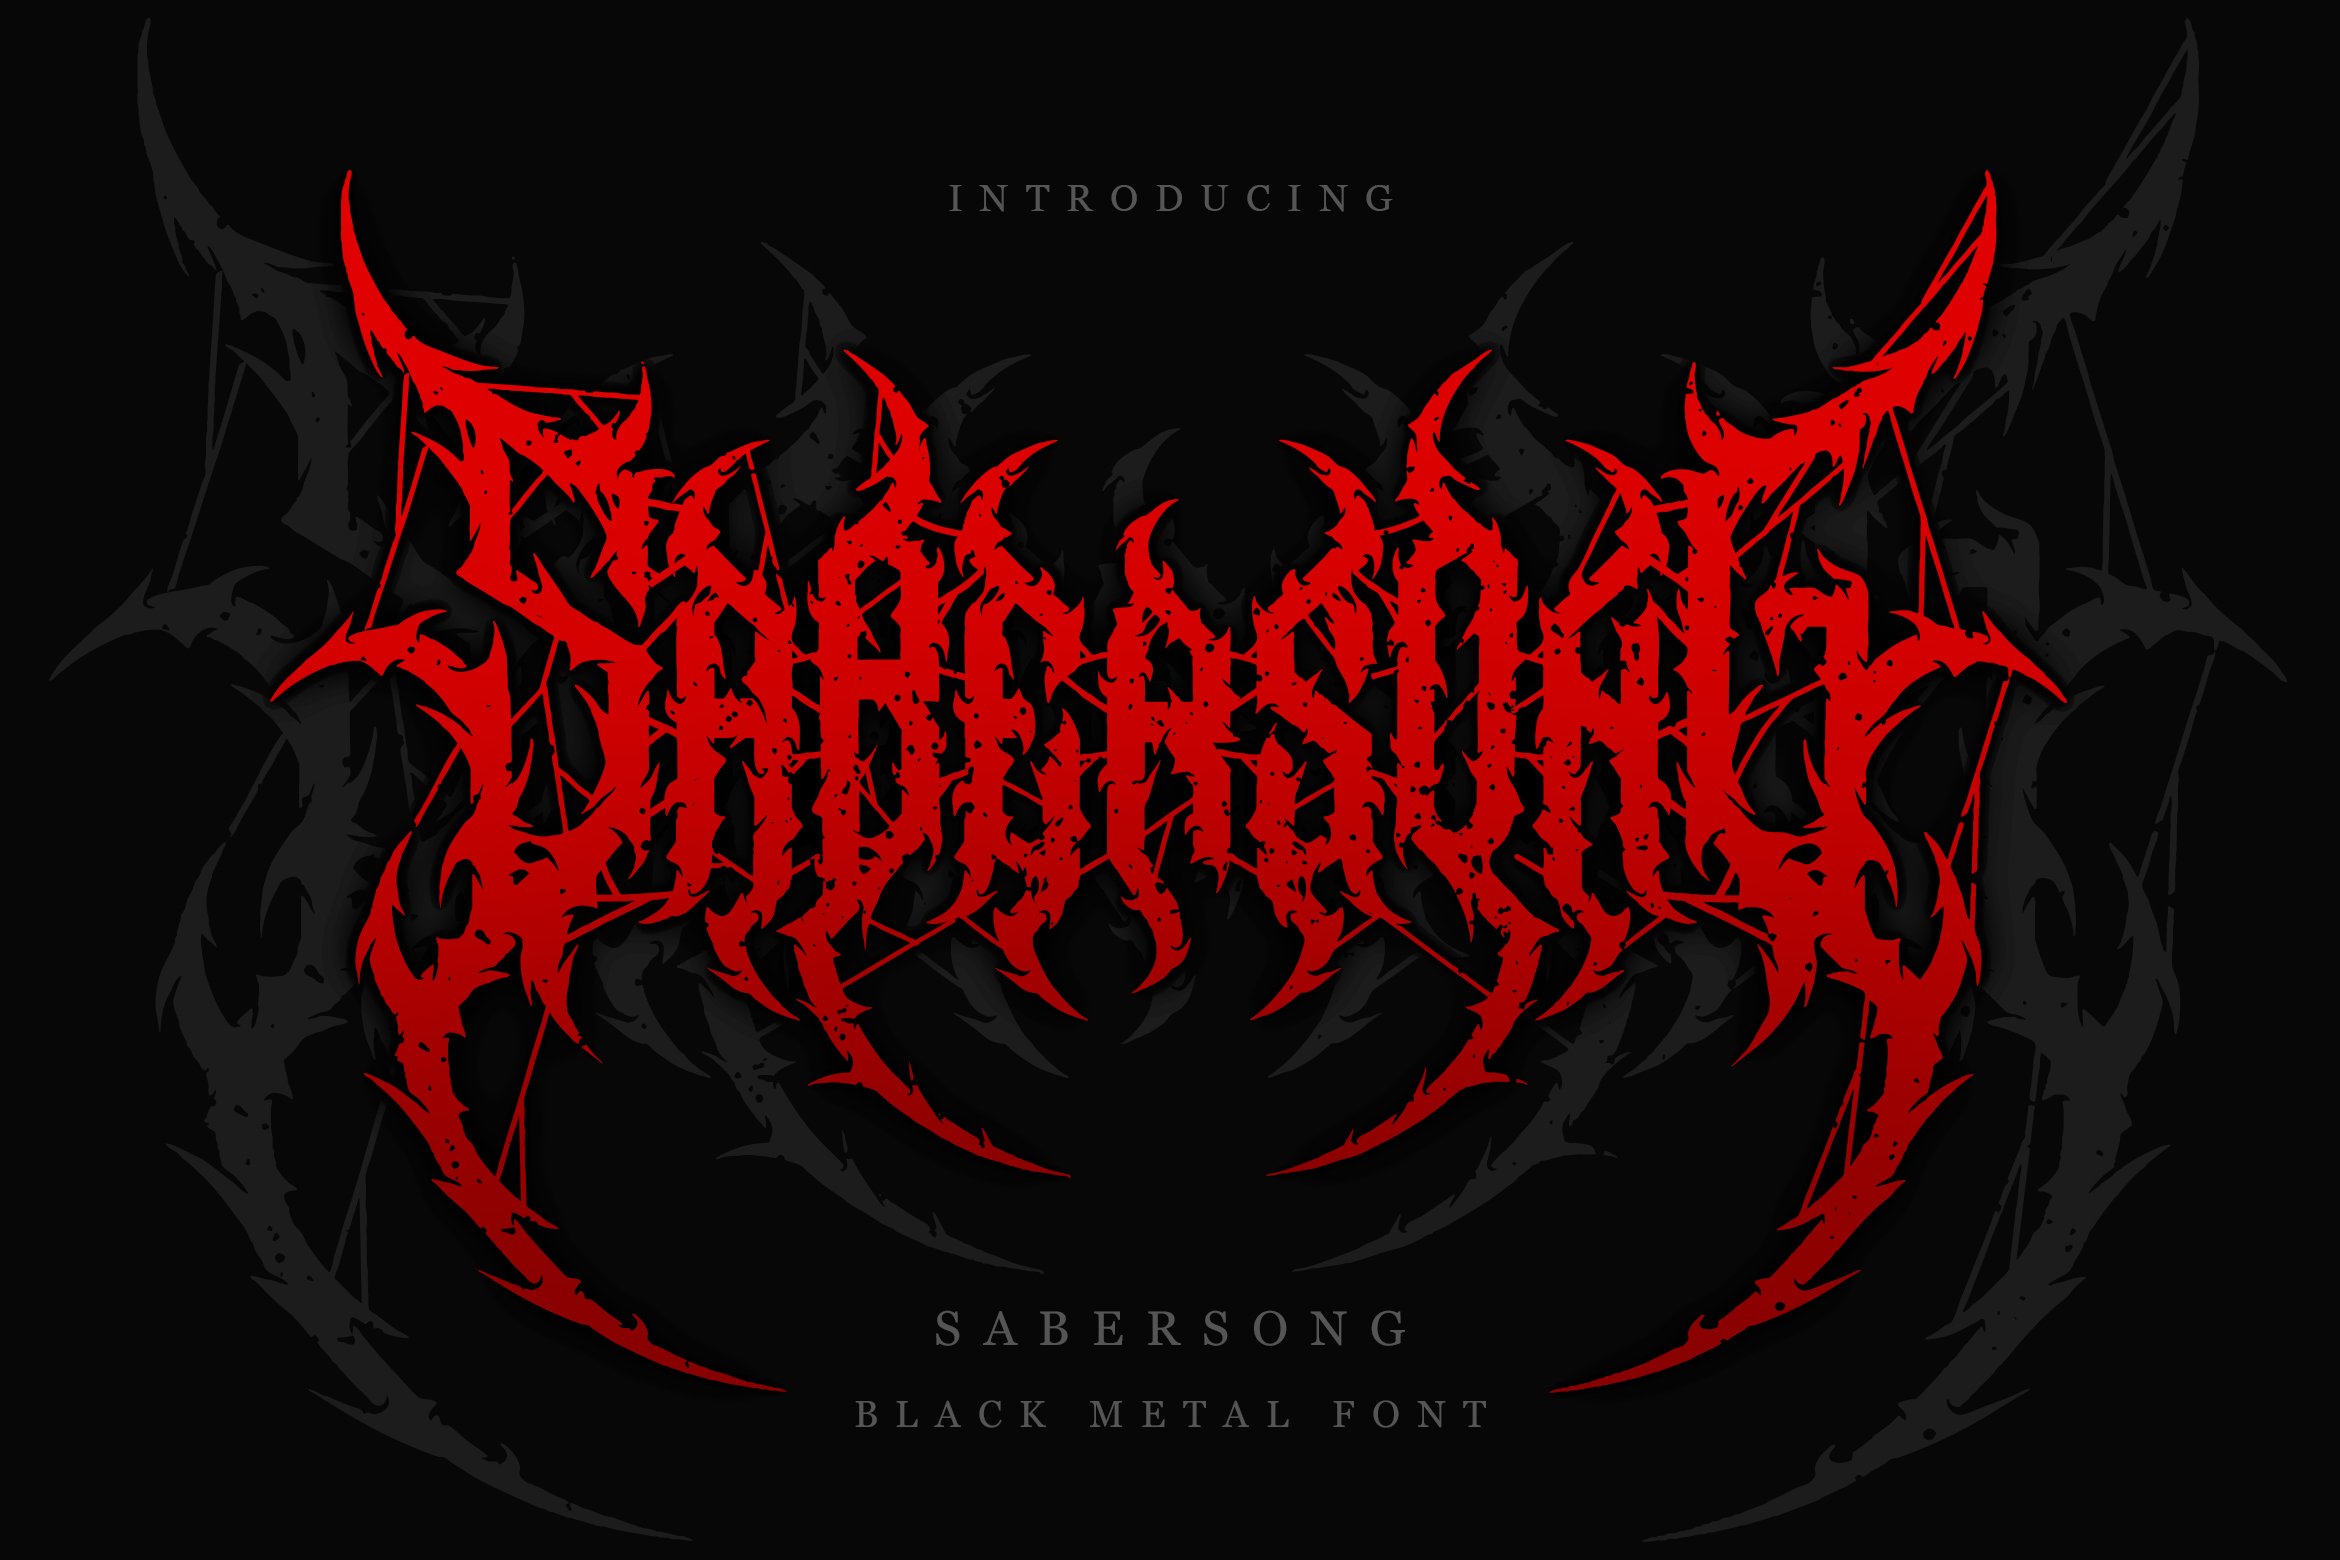 Black metal font "Sabersong" with sharp edges and thick strokes.